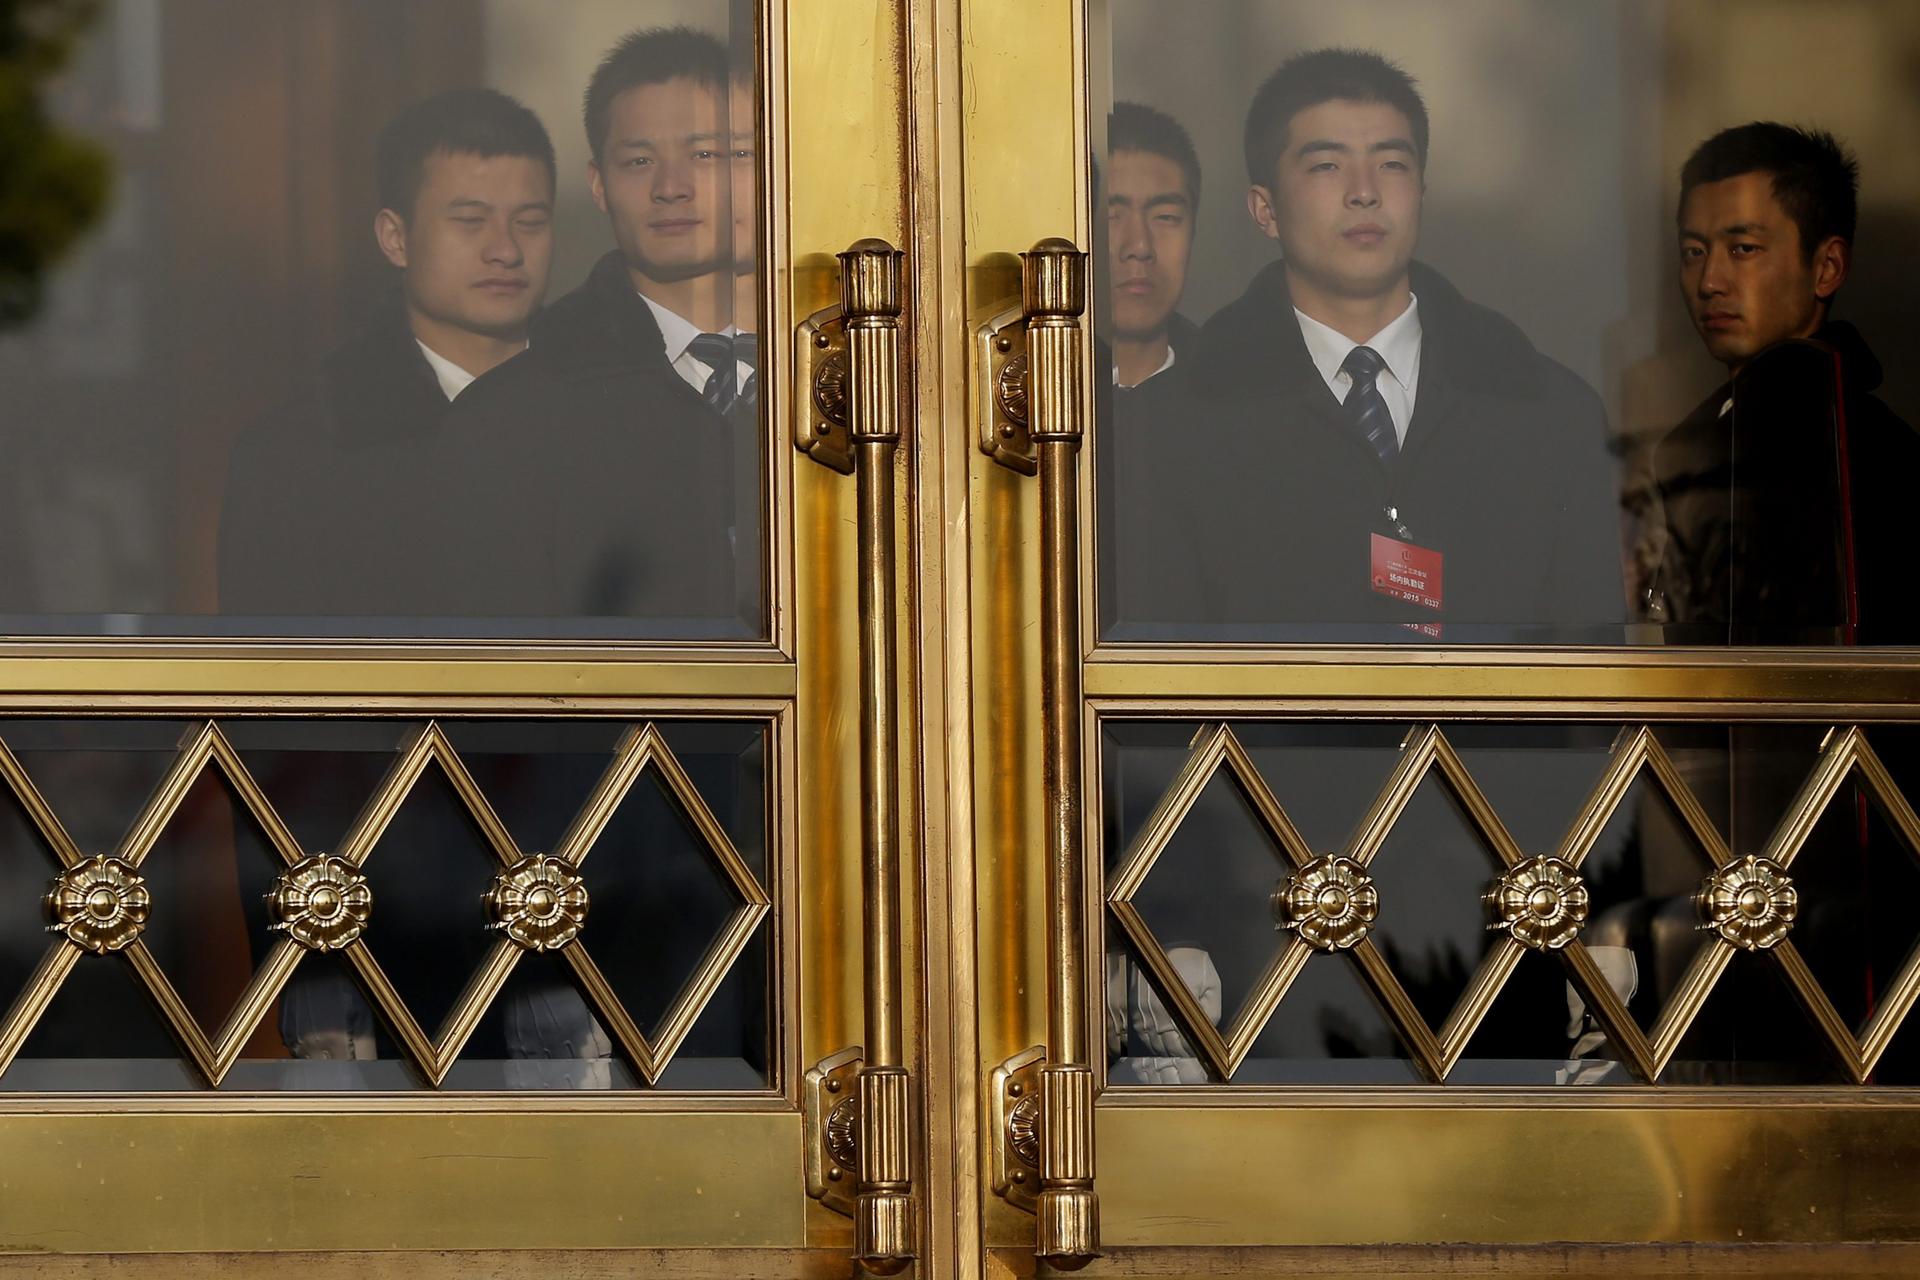 Security officers guard the entrance of the Great Hall of the People during the National People's Congress session in Beijing yesterday. Photo: EPA